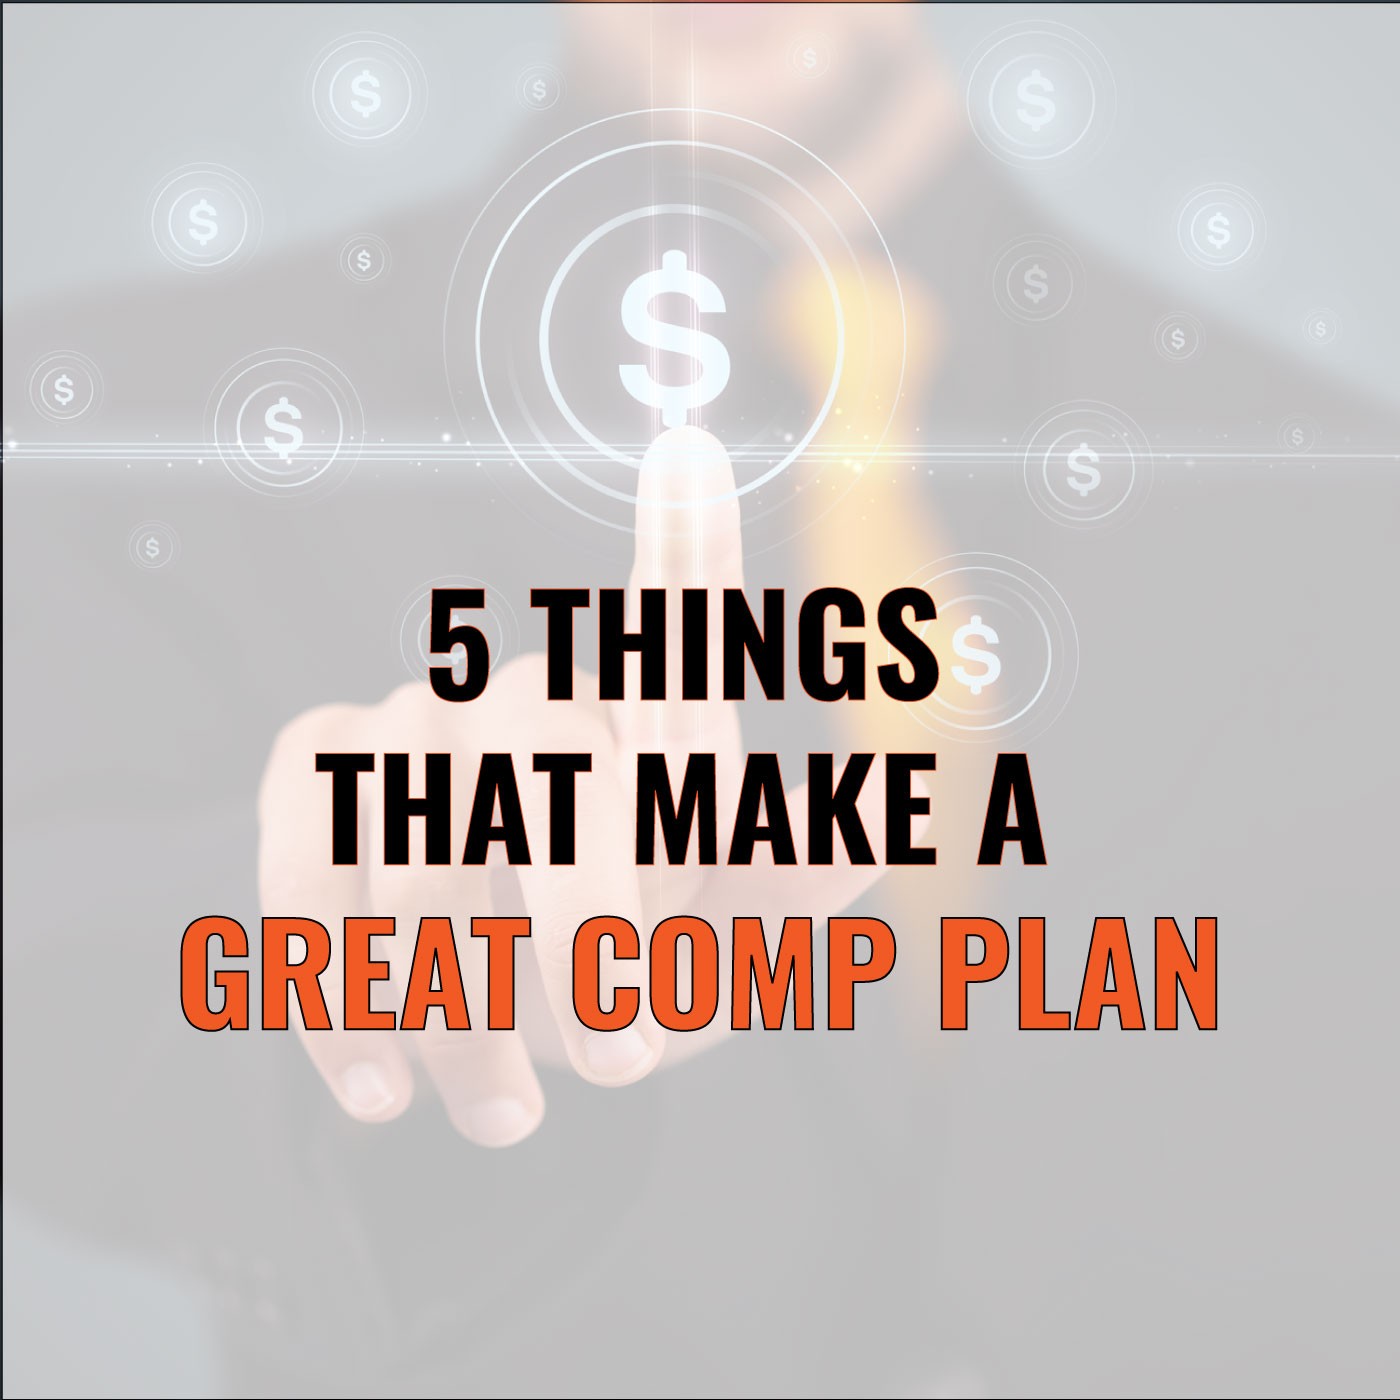 Episode 49: Brian Burns on 5 Things That Make a Great Comp Plan